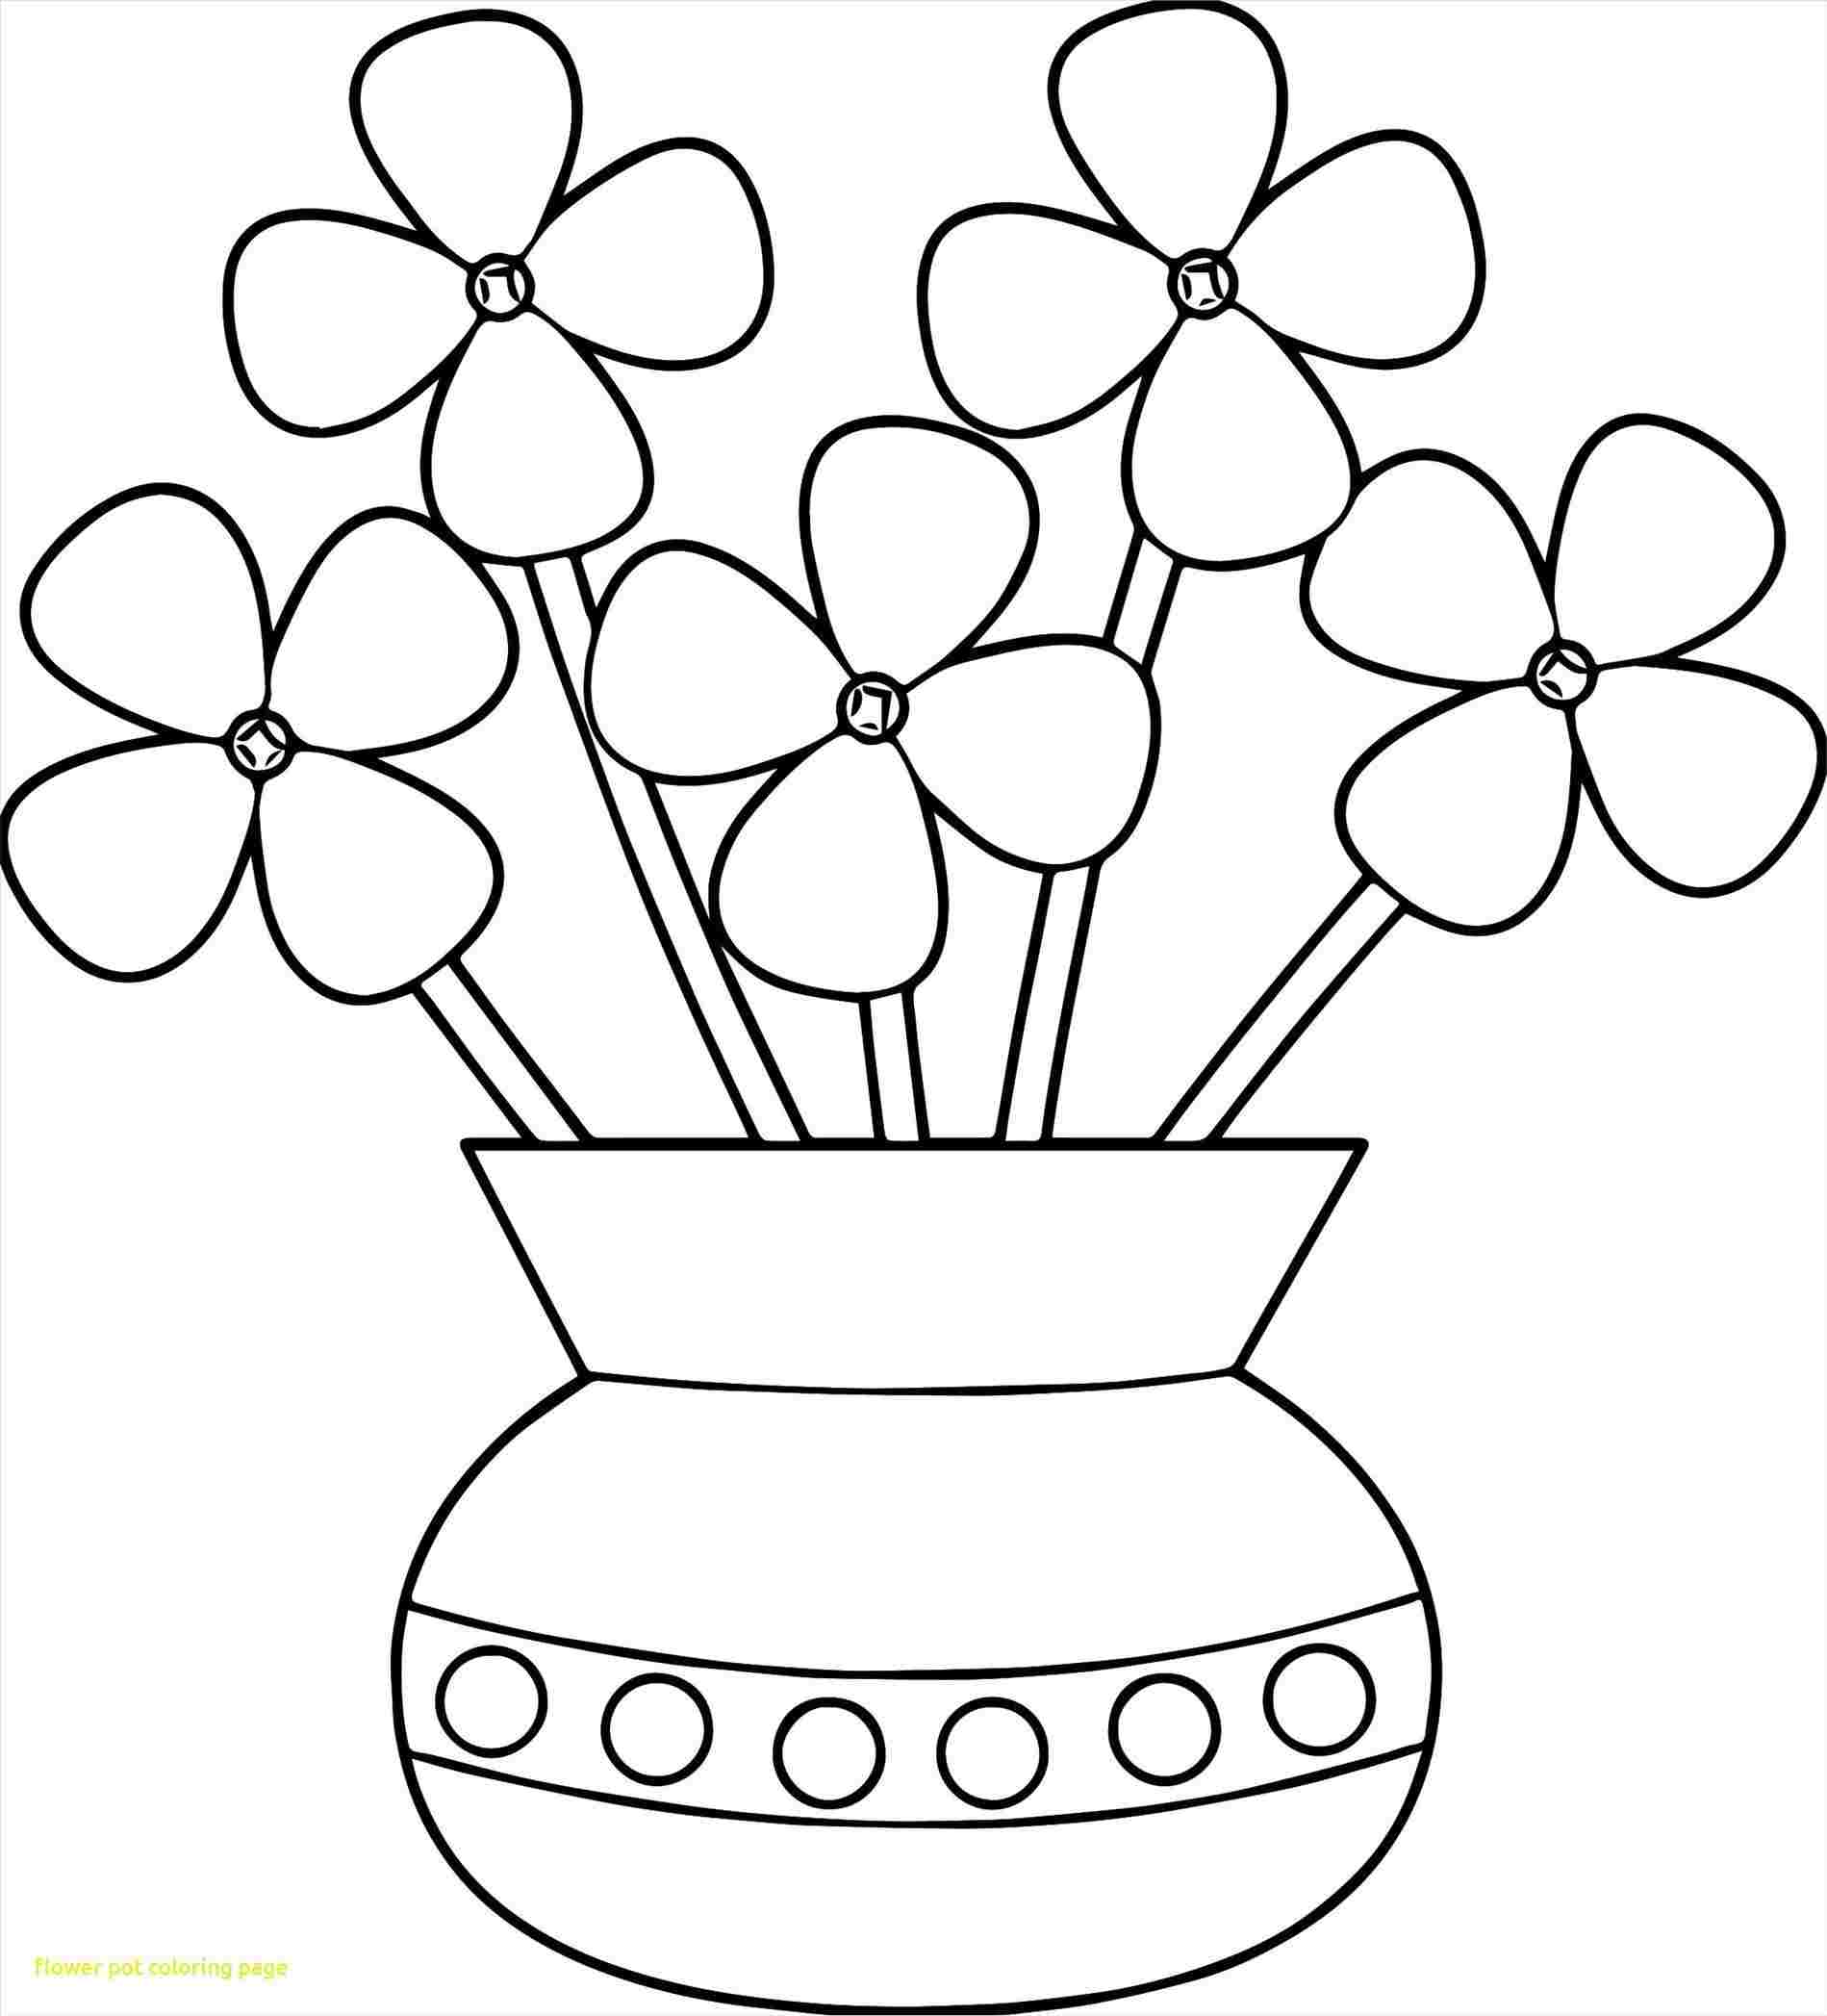 How To Draw Flower Pot Very Easy